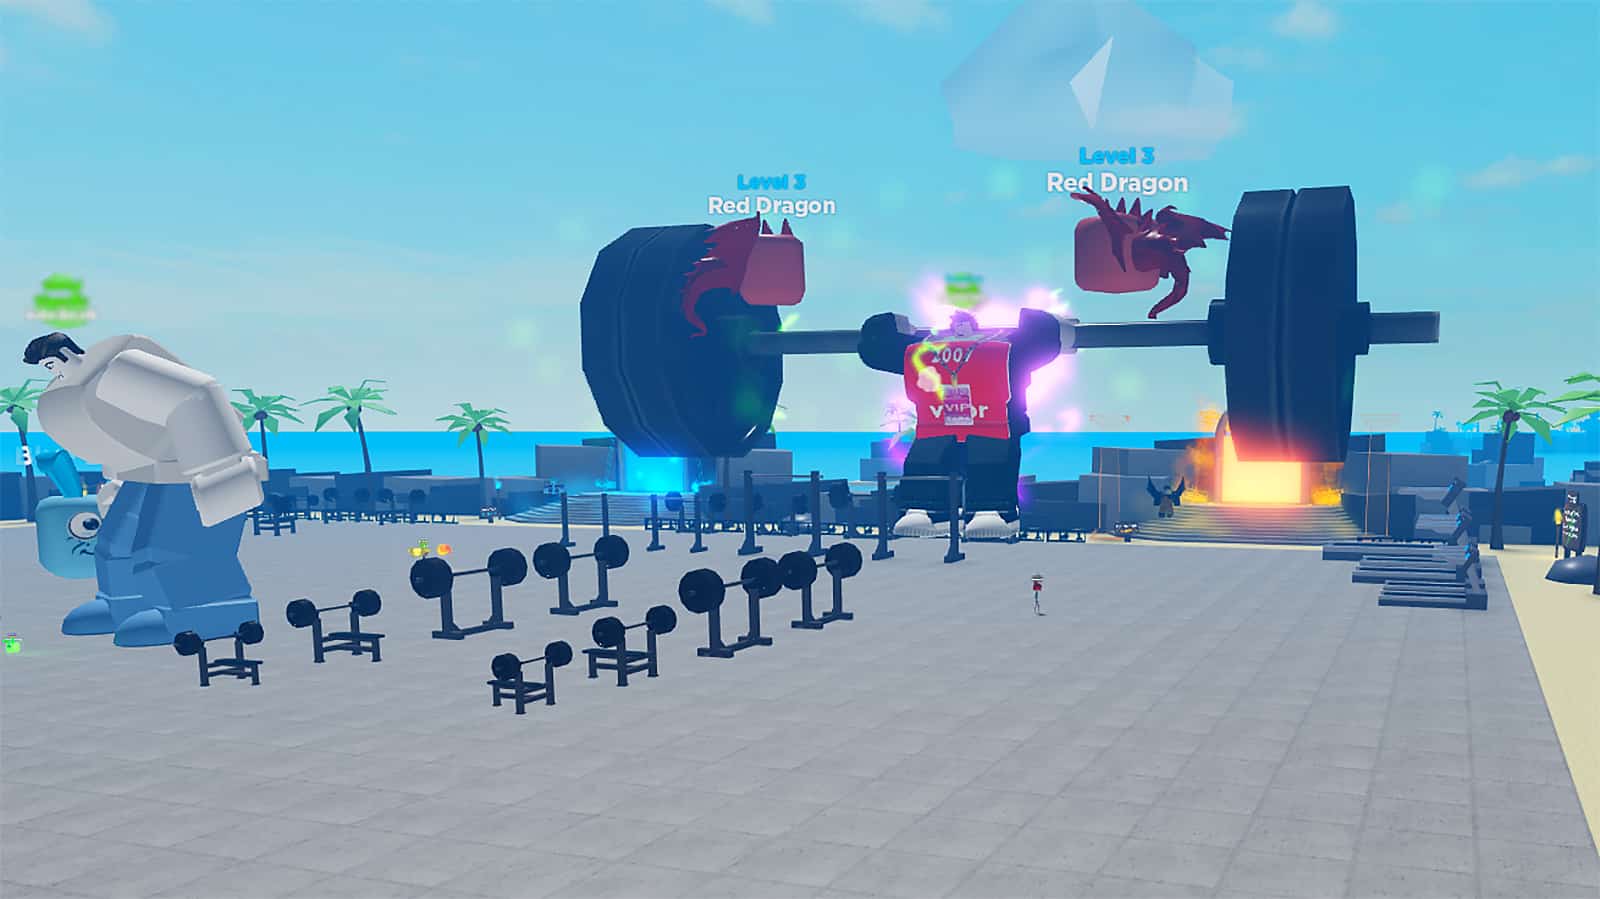 💪 Muscle Legends ALL CODES - FREE GEMS AND STRENGTH - Roblox 